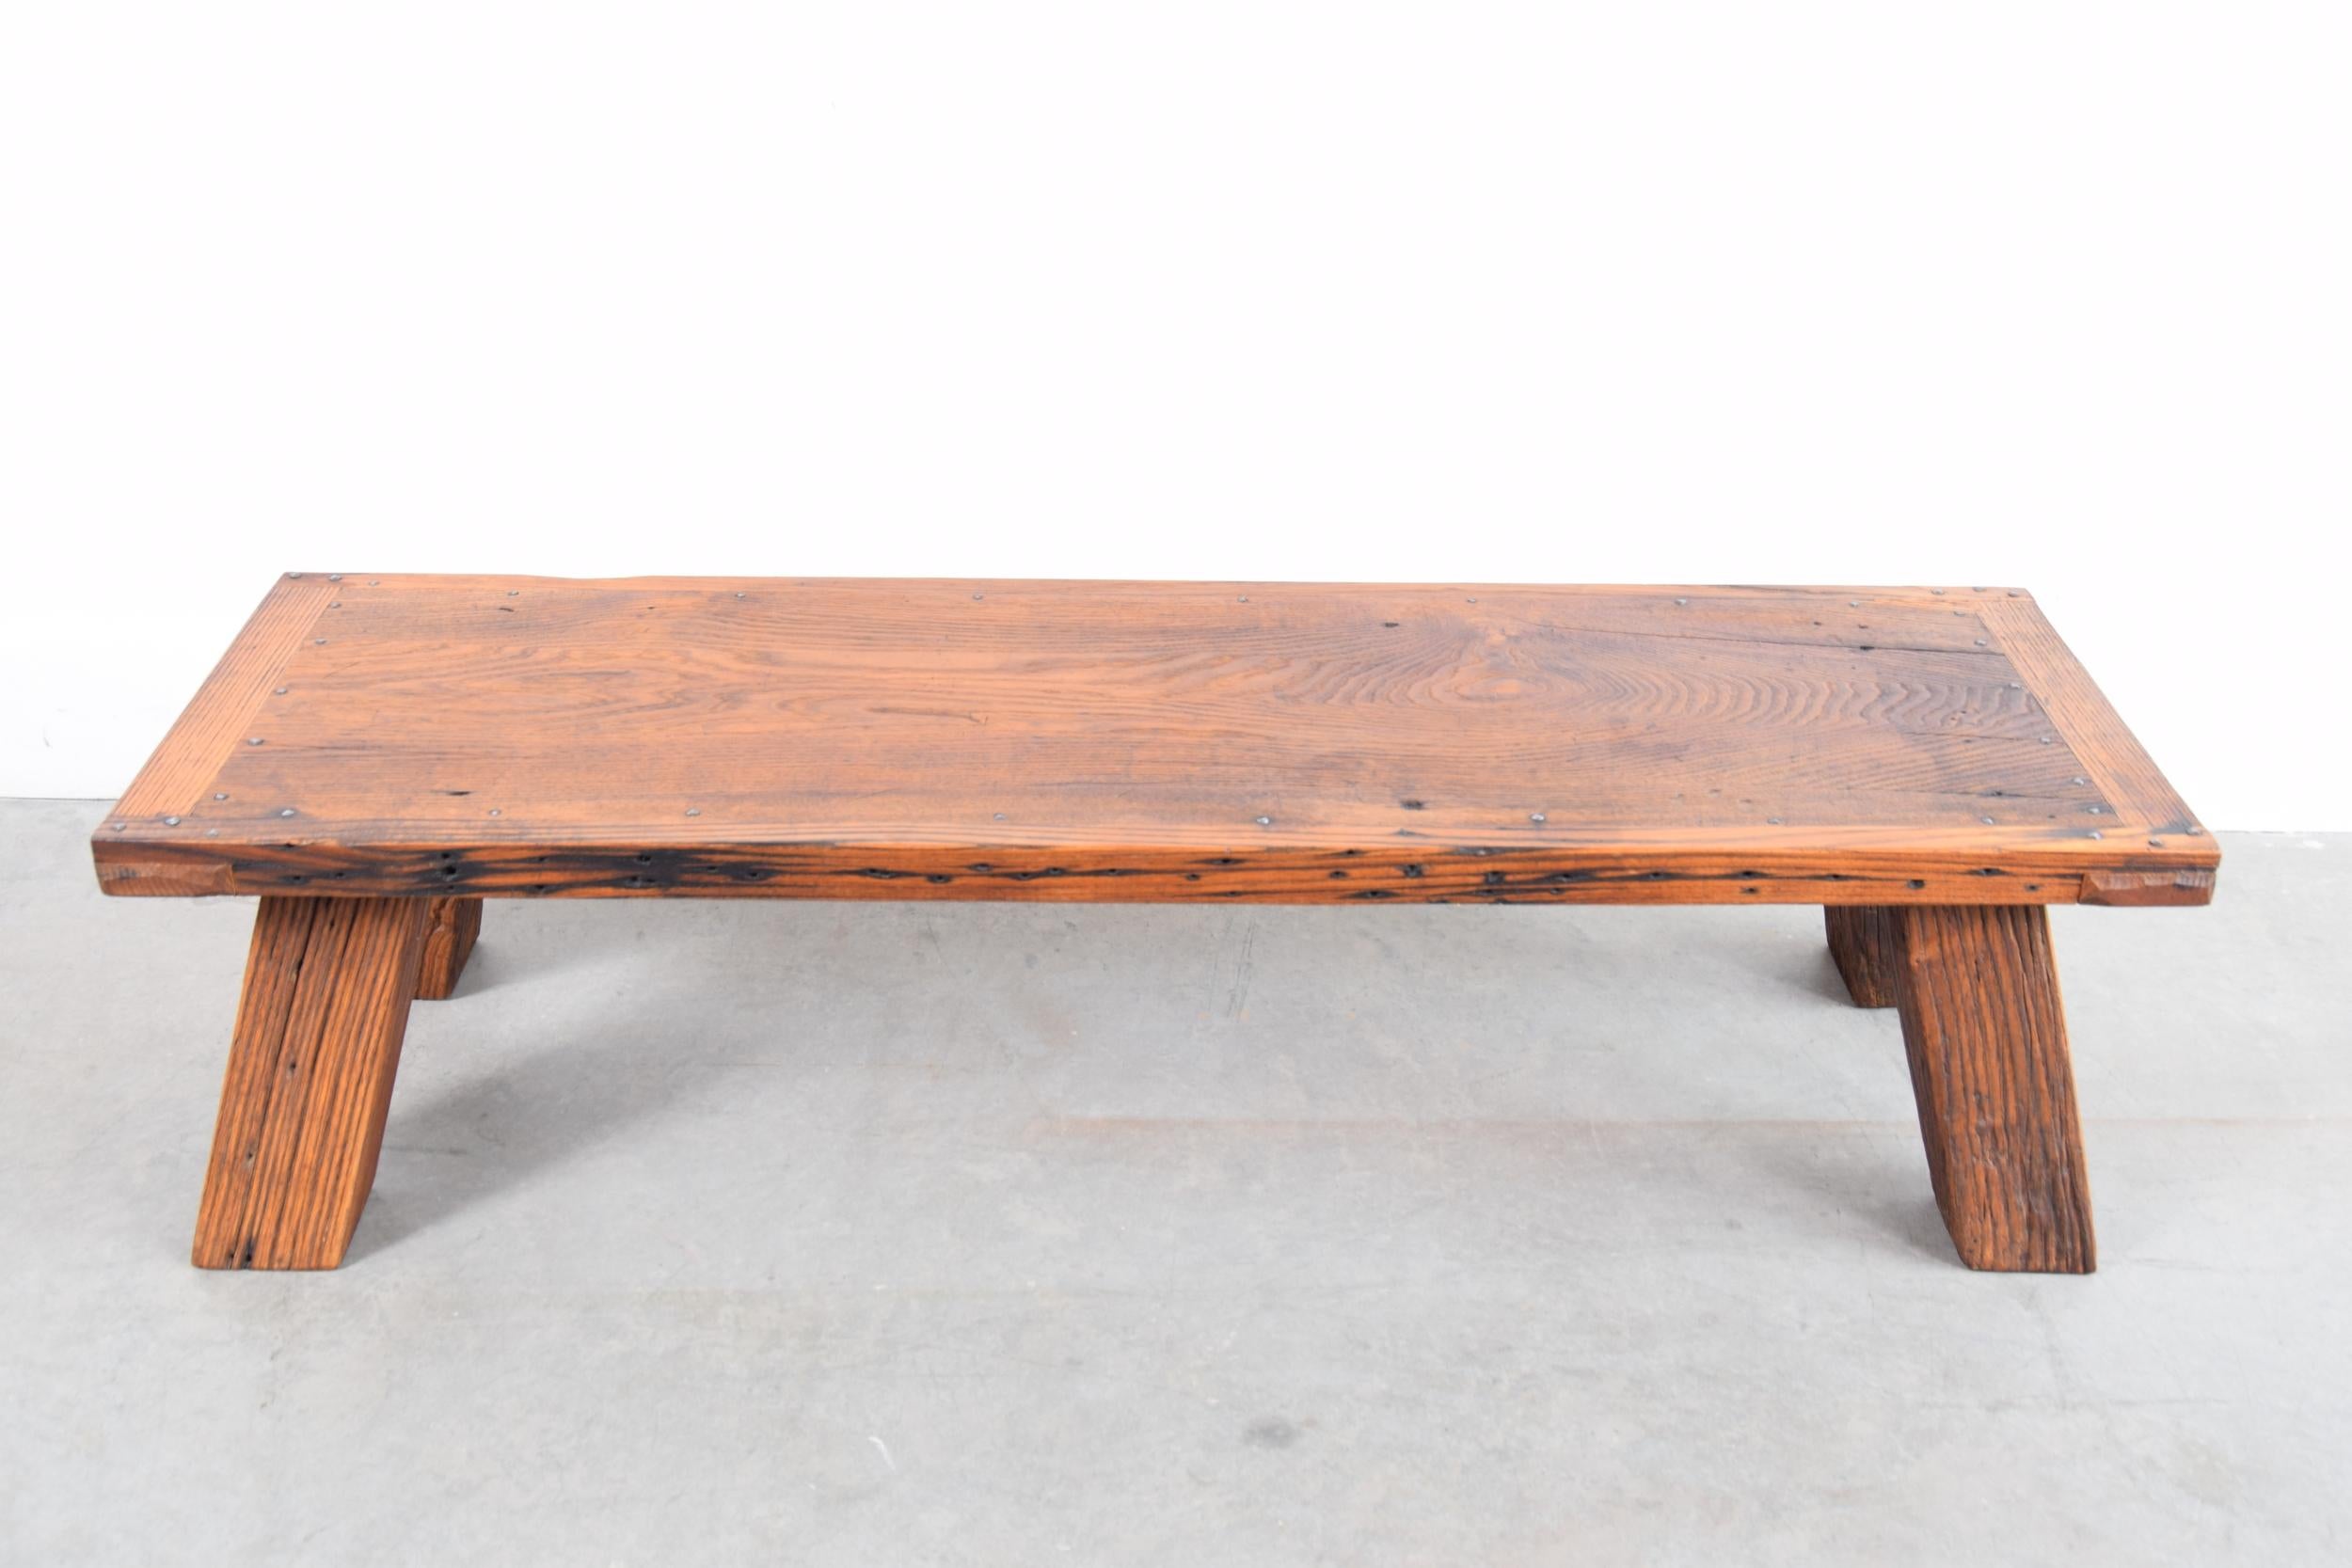 Coffee table constructed of re-claimed, solid North American chestnut. Very well constructed. One leg is notched out (a construction detail from whatever building this chestnut was salvaged from) on one corner. This Chestnut is likely 100 - 150